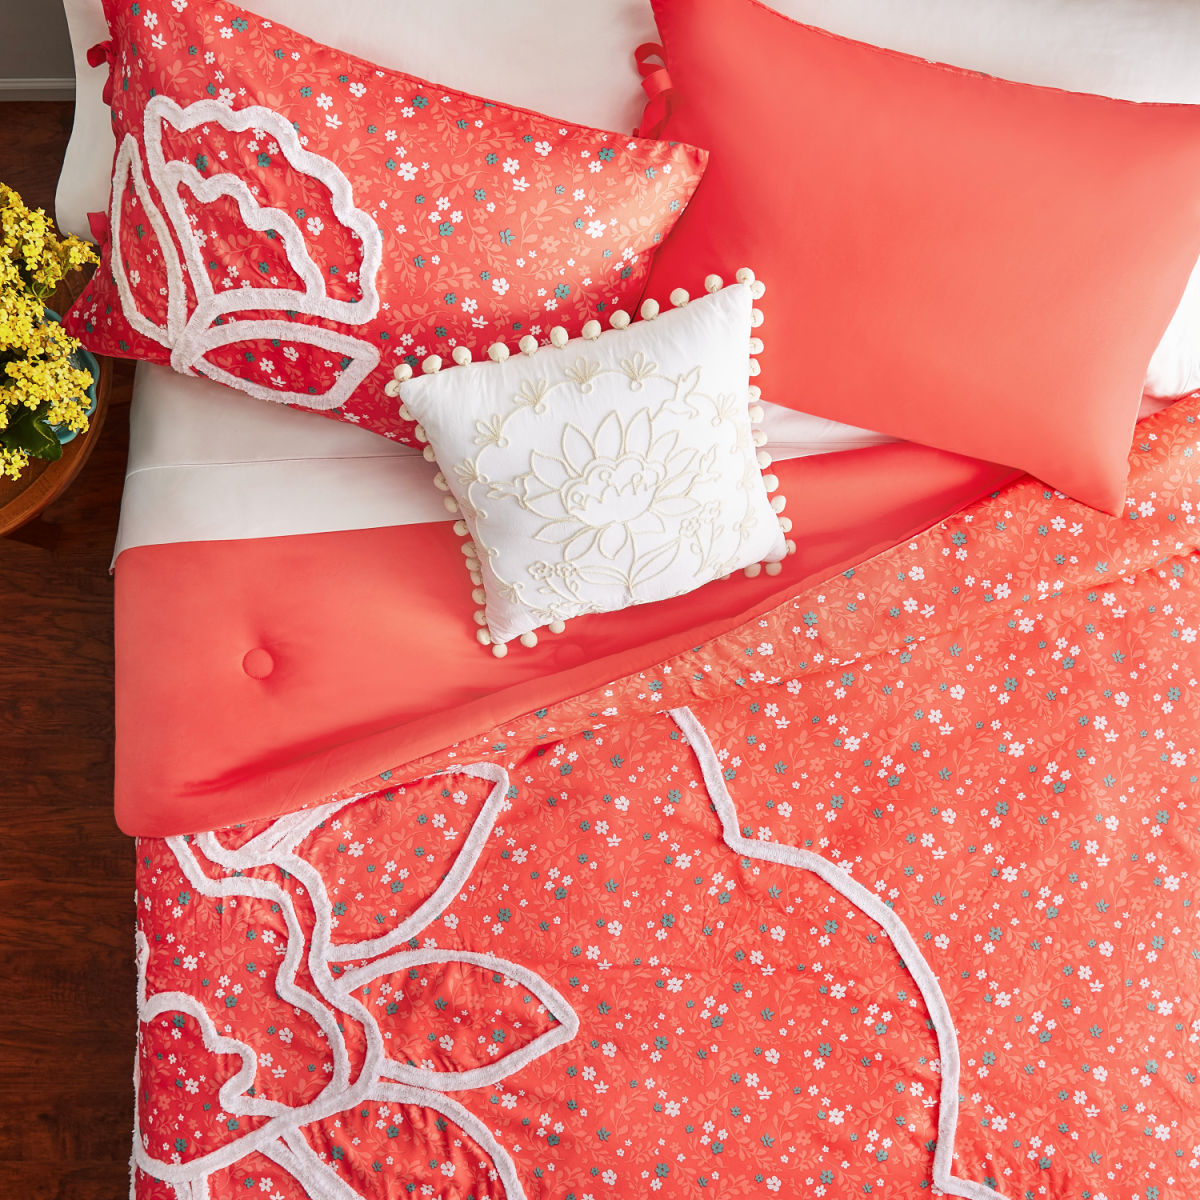 The Pioneer Woman 4-Piece Floral Comforter Set